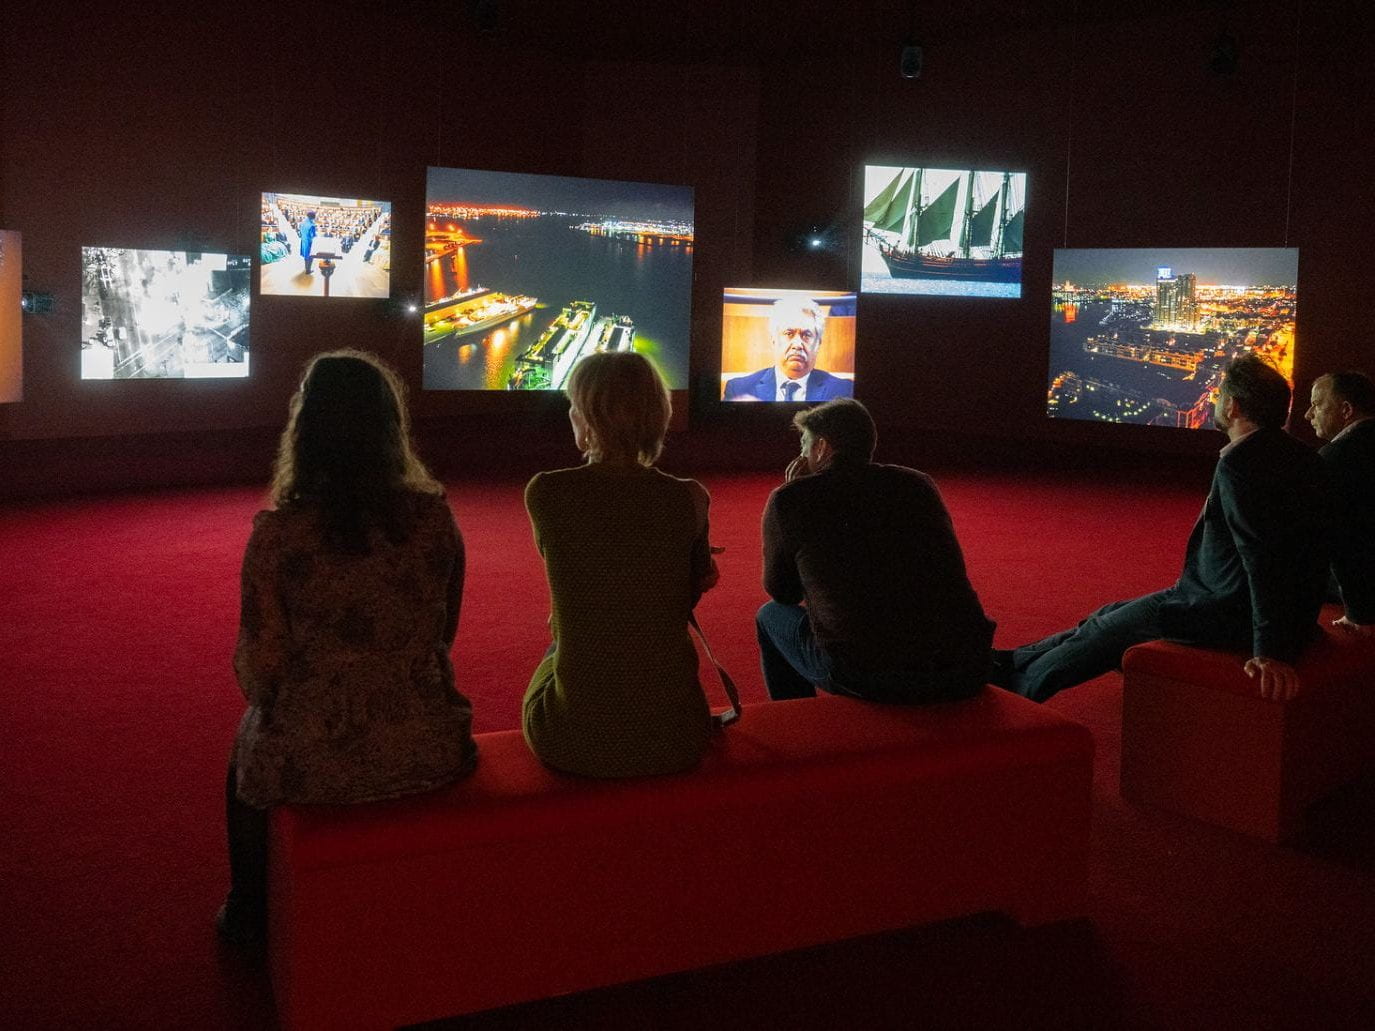 People at a multi media installation watching images on 6 different screens.